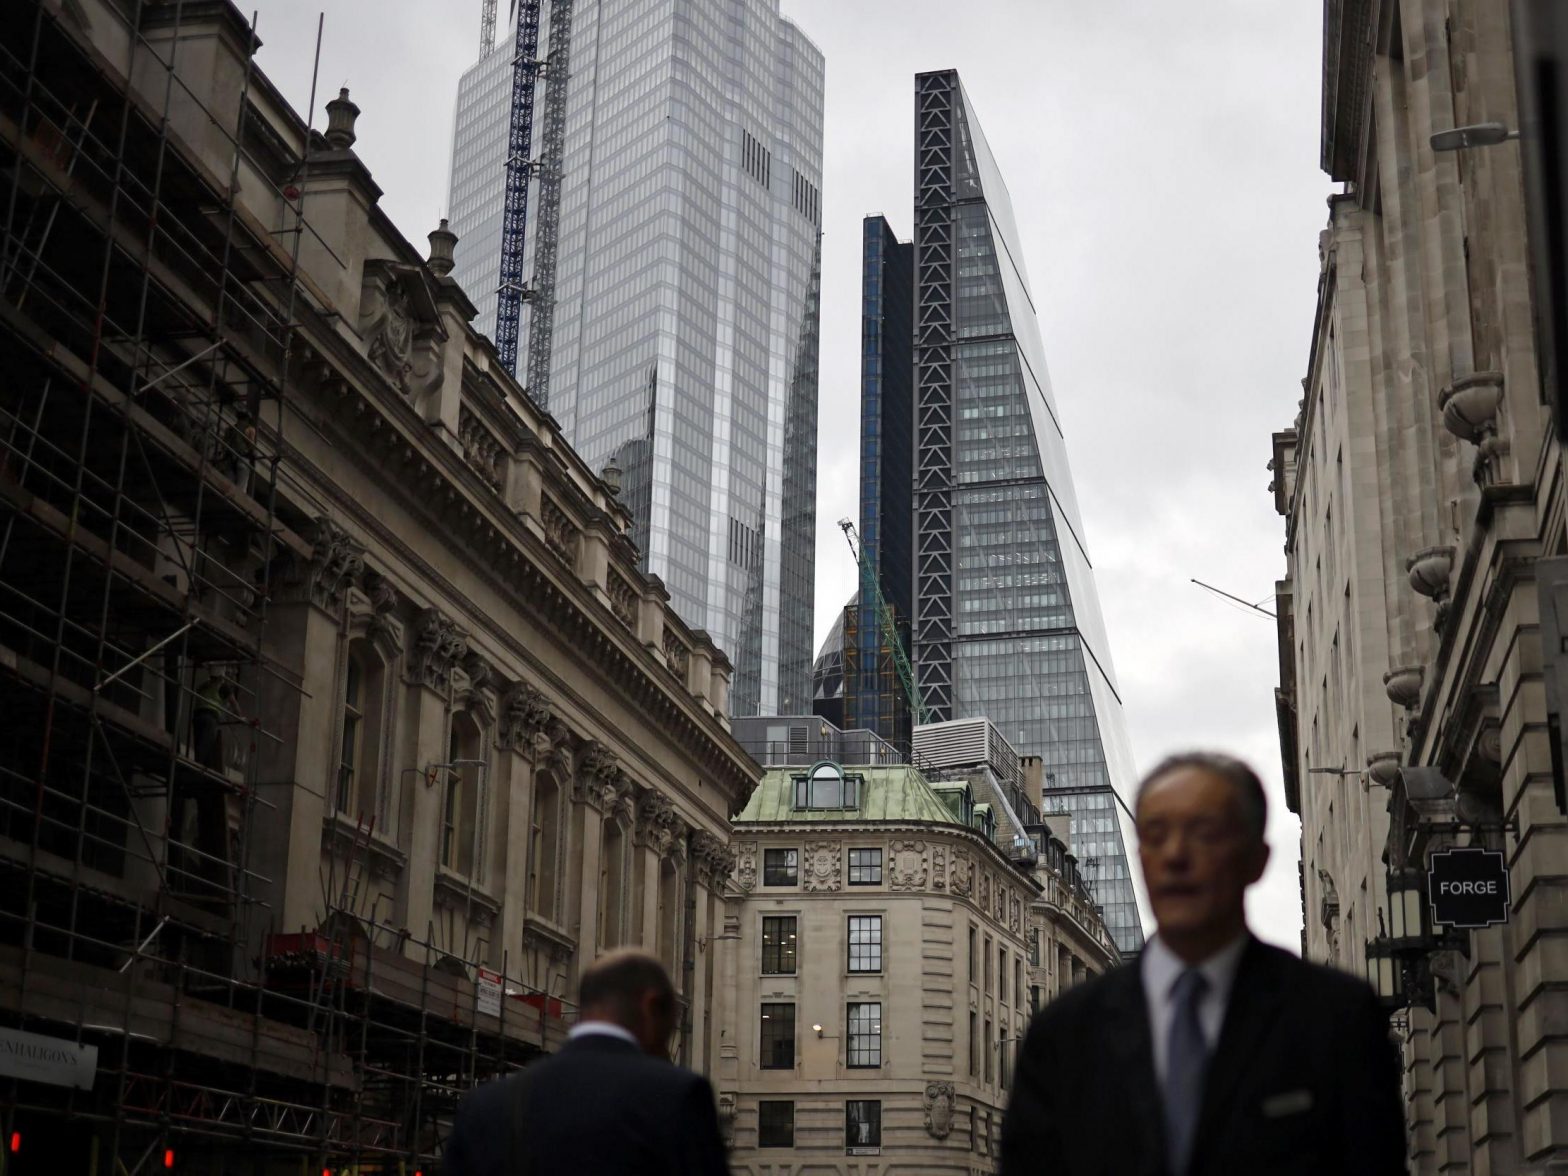 New York surges ahead of London as world’s top finance hub as Brexit undermines confidence